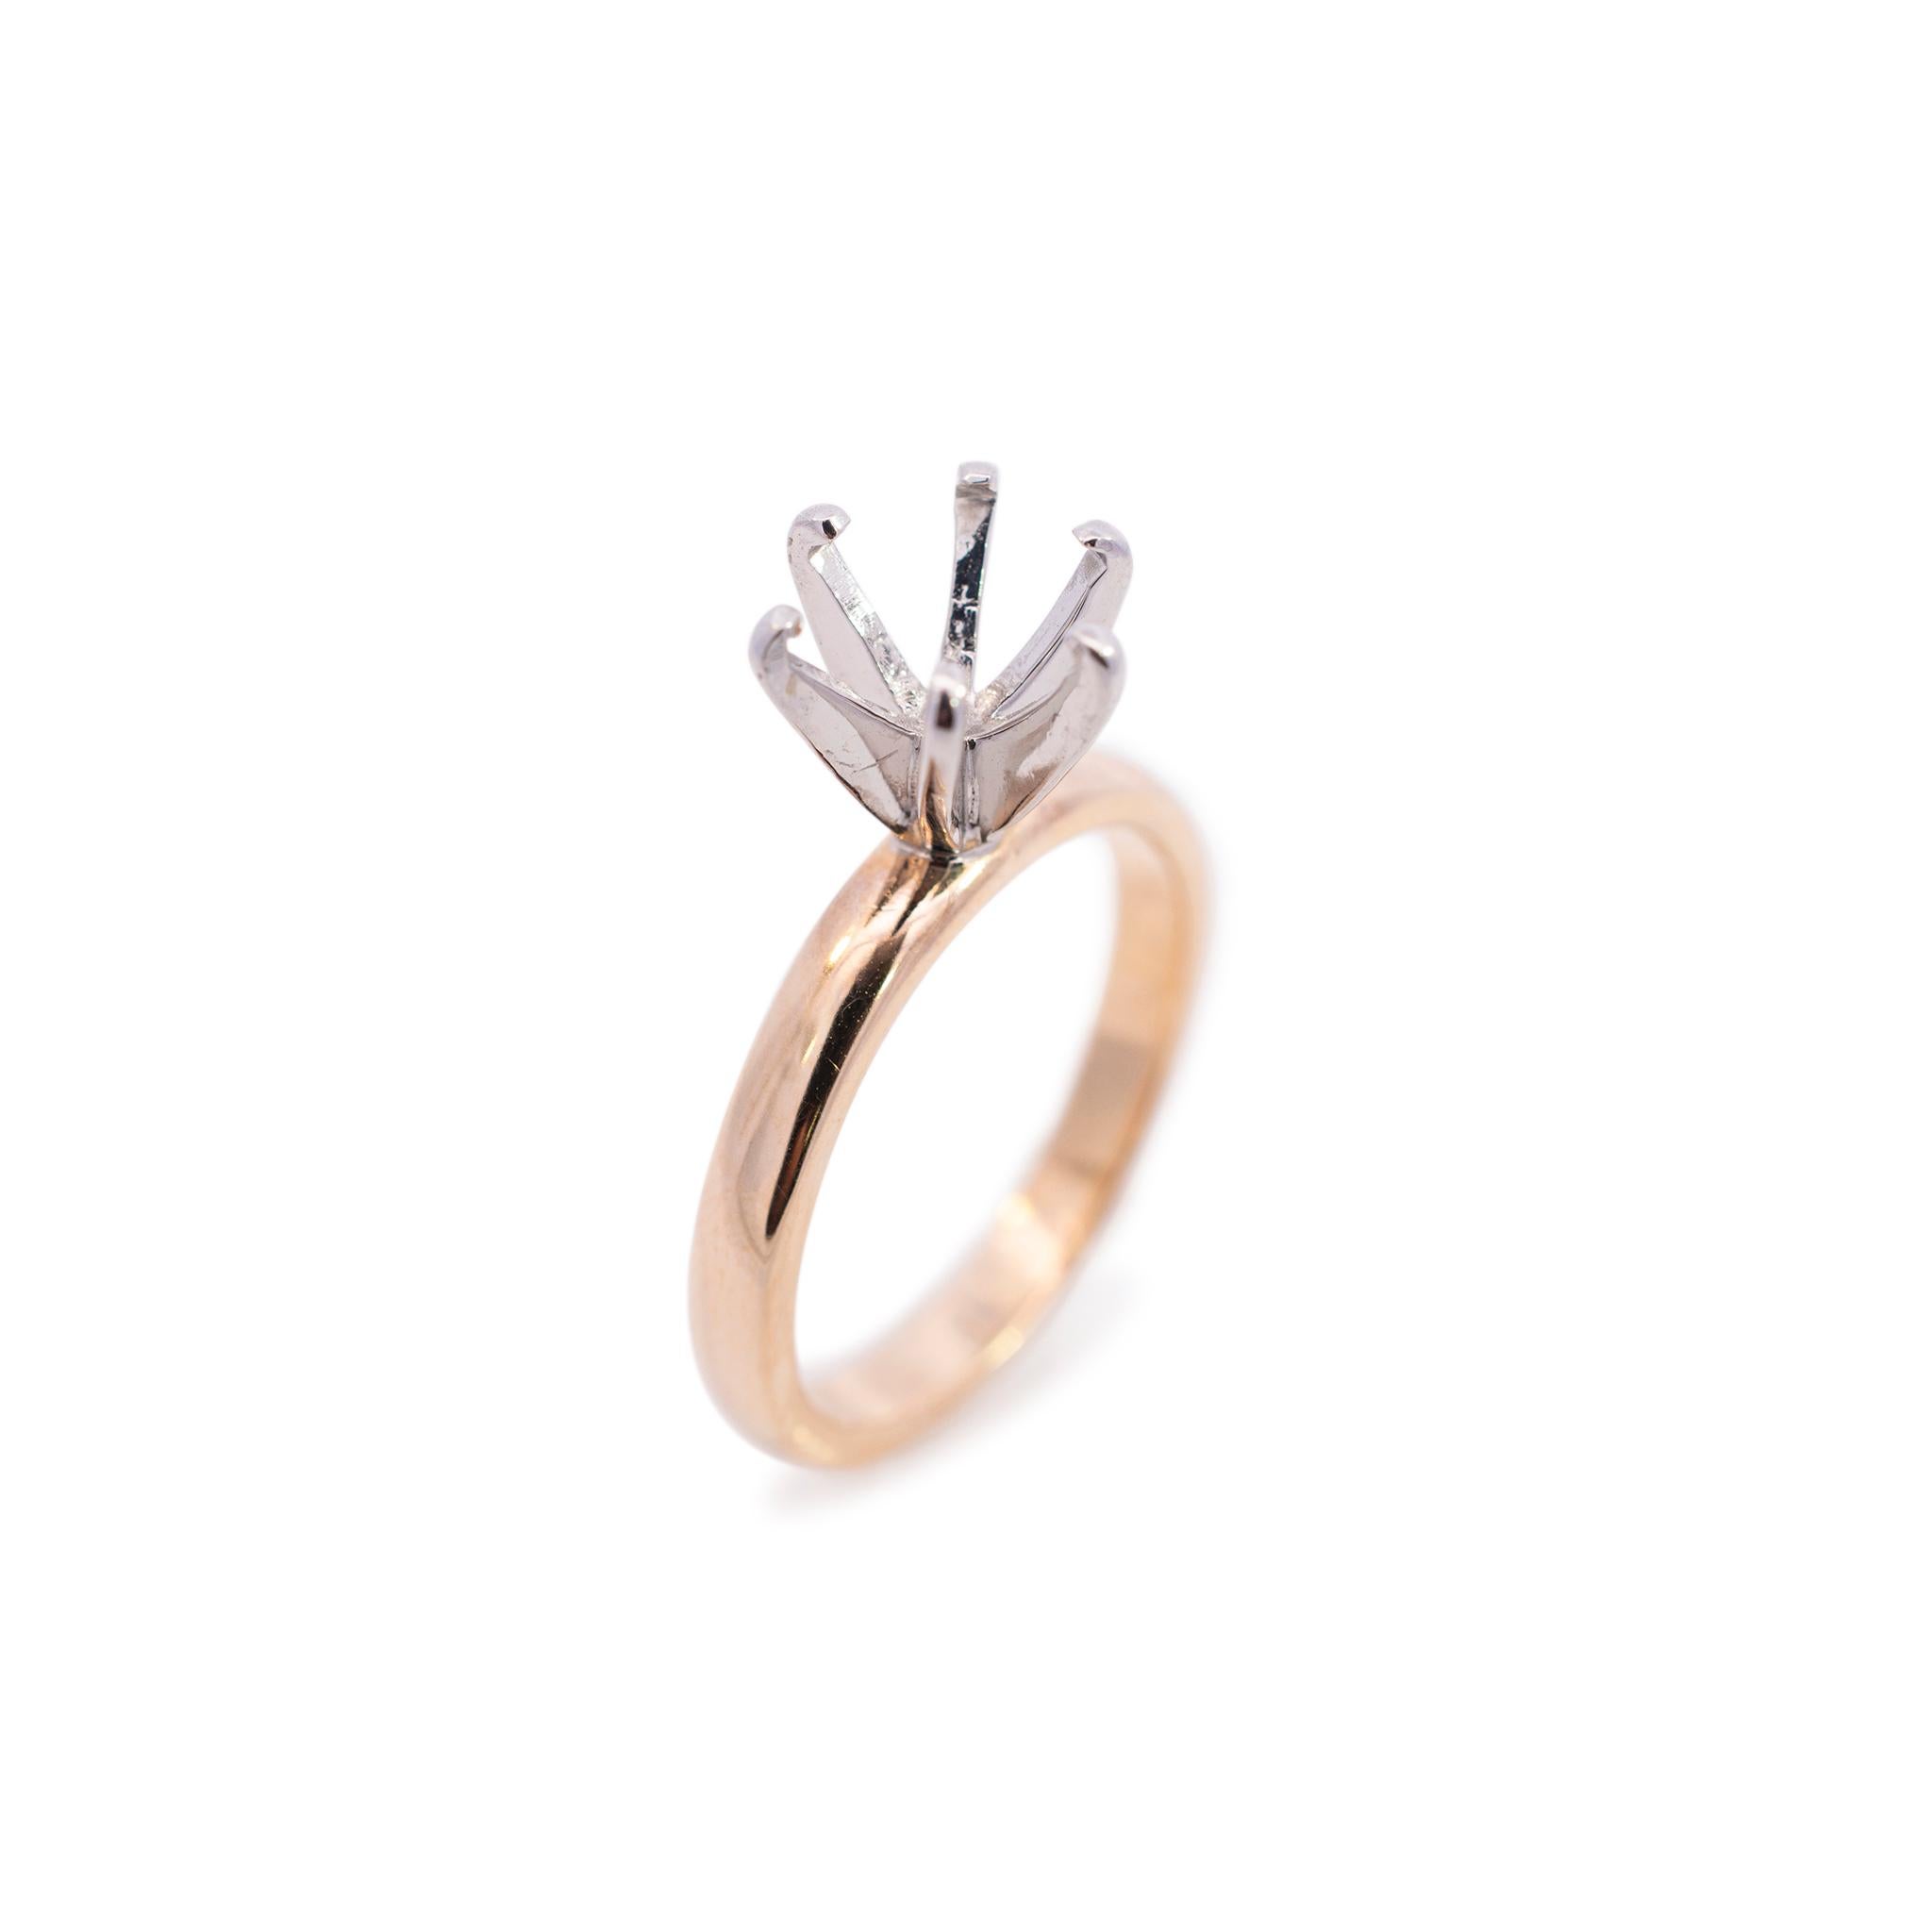 One ladies custom made polished 14K white & yellow gold, solitaire engagement, semi-mount ring with a soft-square shank. The ring is a size 5.25 and is 1.46mm thick tapering to 2.93mm in width. The ring weighs a total of 4.20 grams. Engraved with